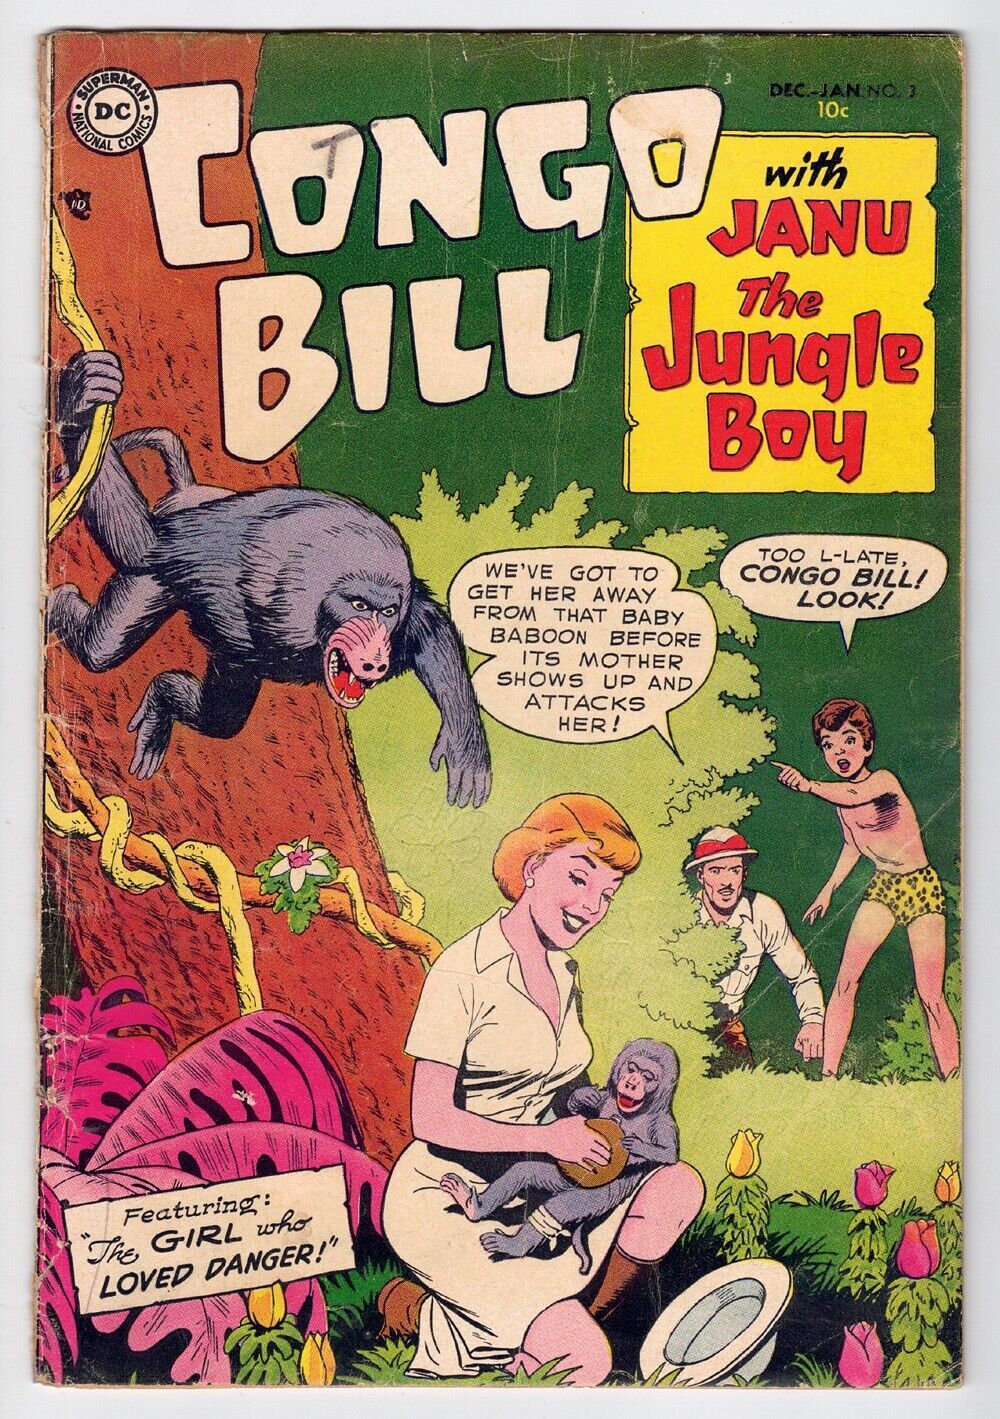 CONGO BILL #3 2.5 SCARCE DC COMICS 1954 OW PAGES GREG EIDE COLLECTION